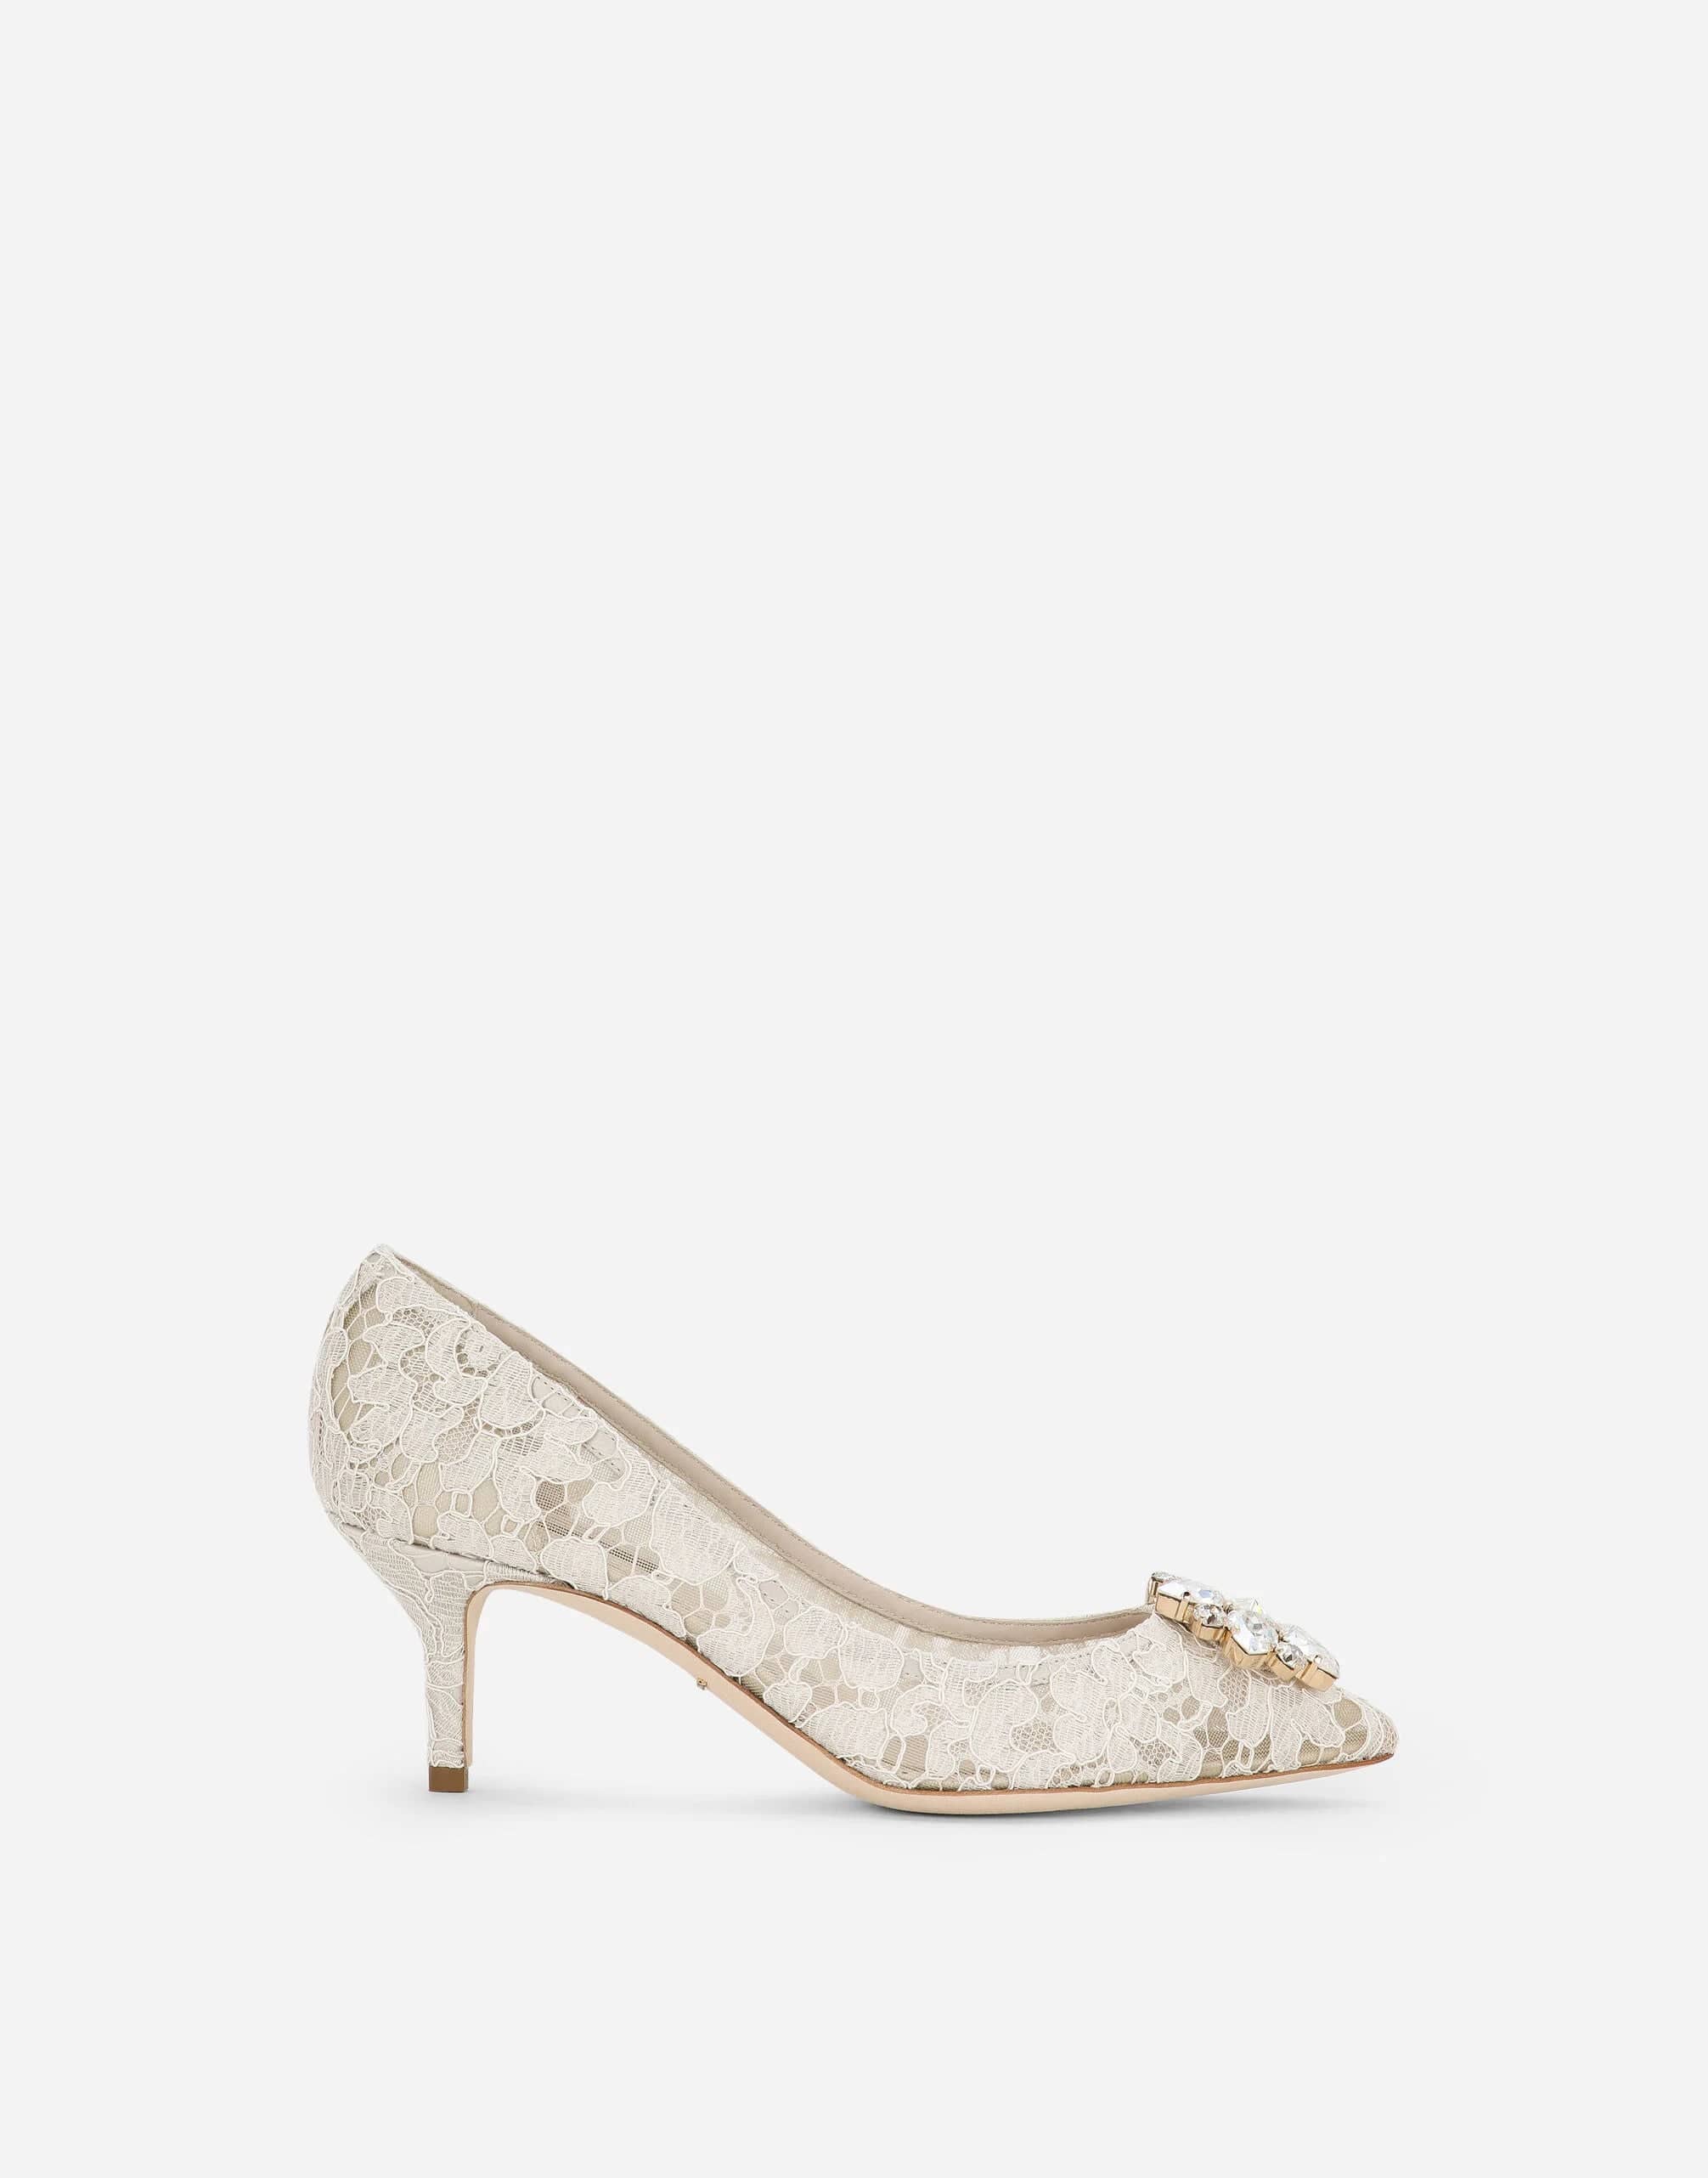 Dolce & Gabbana Pump In Taormina Lace With Crystals